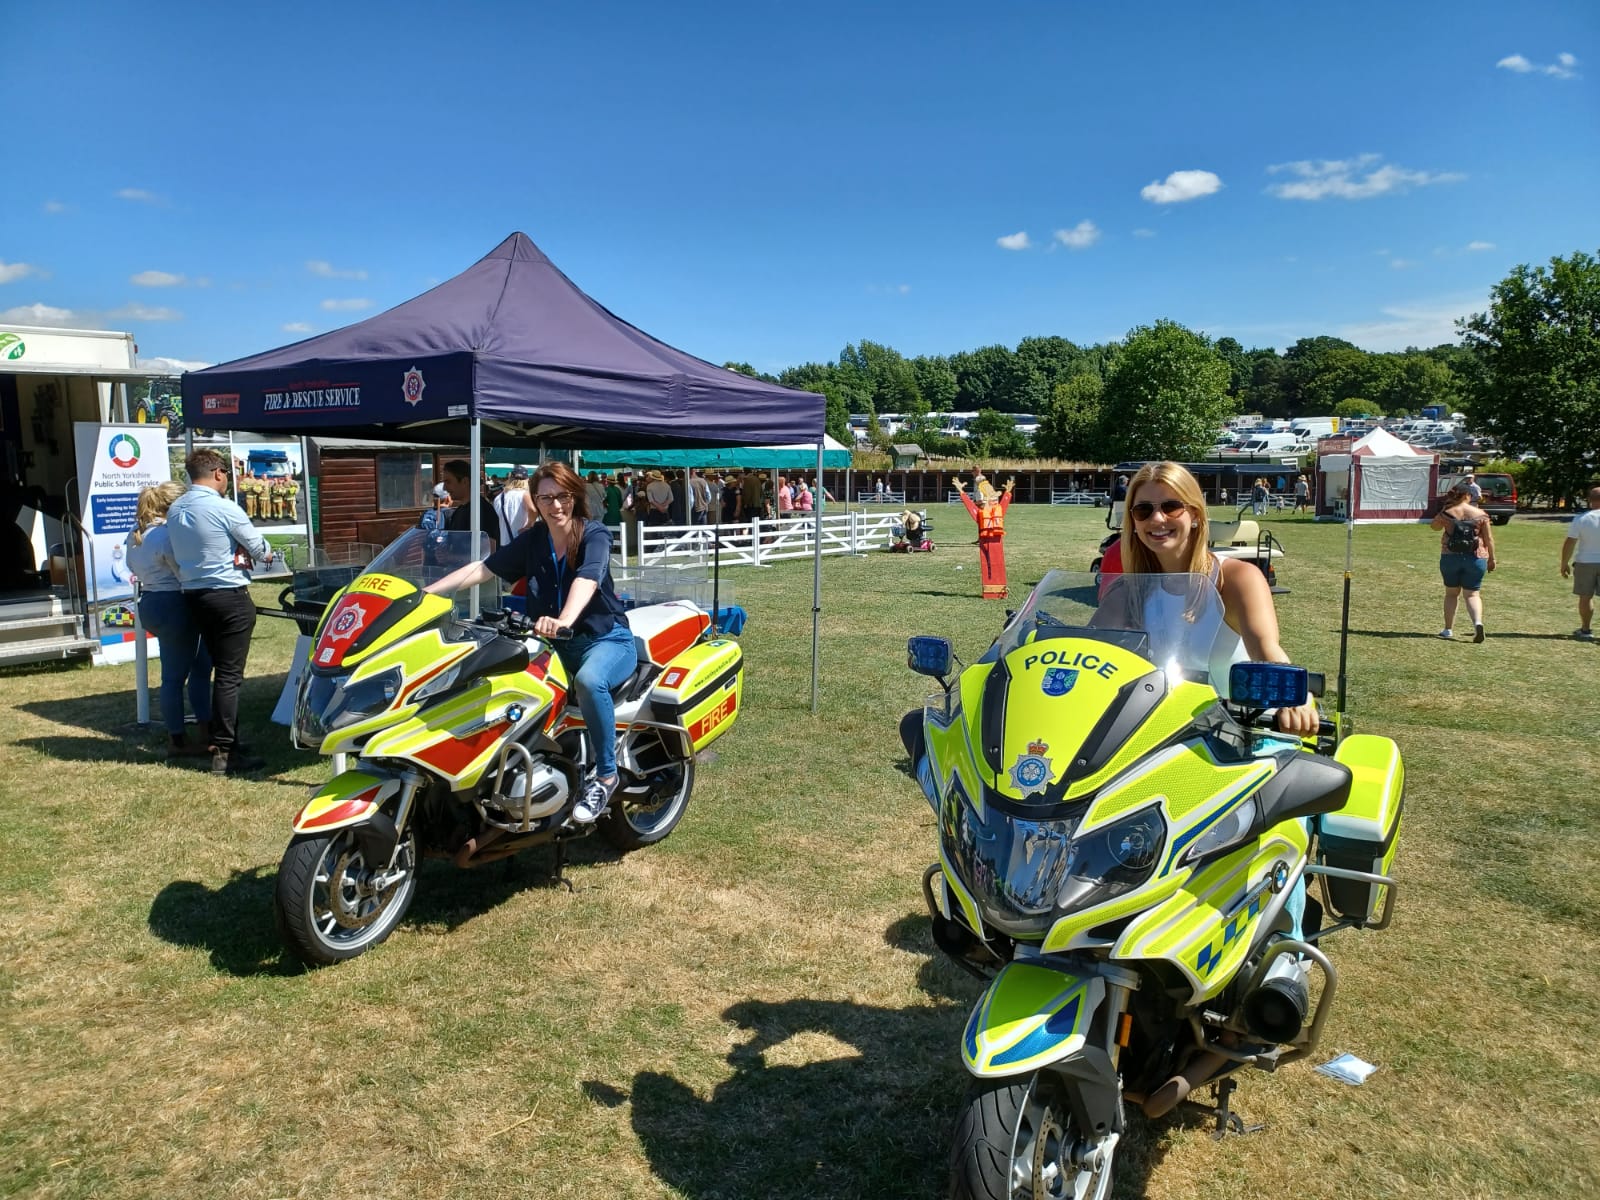 Police and fire motorbikes being sat on by two women at the Great Yorkshire Show